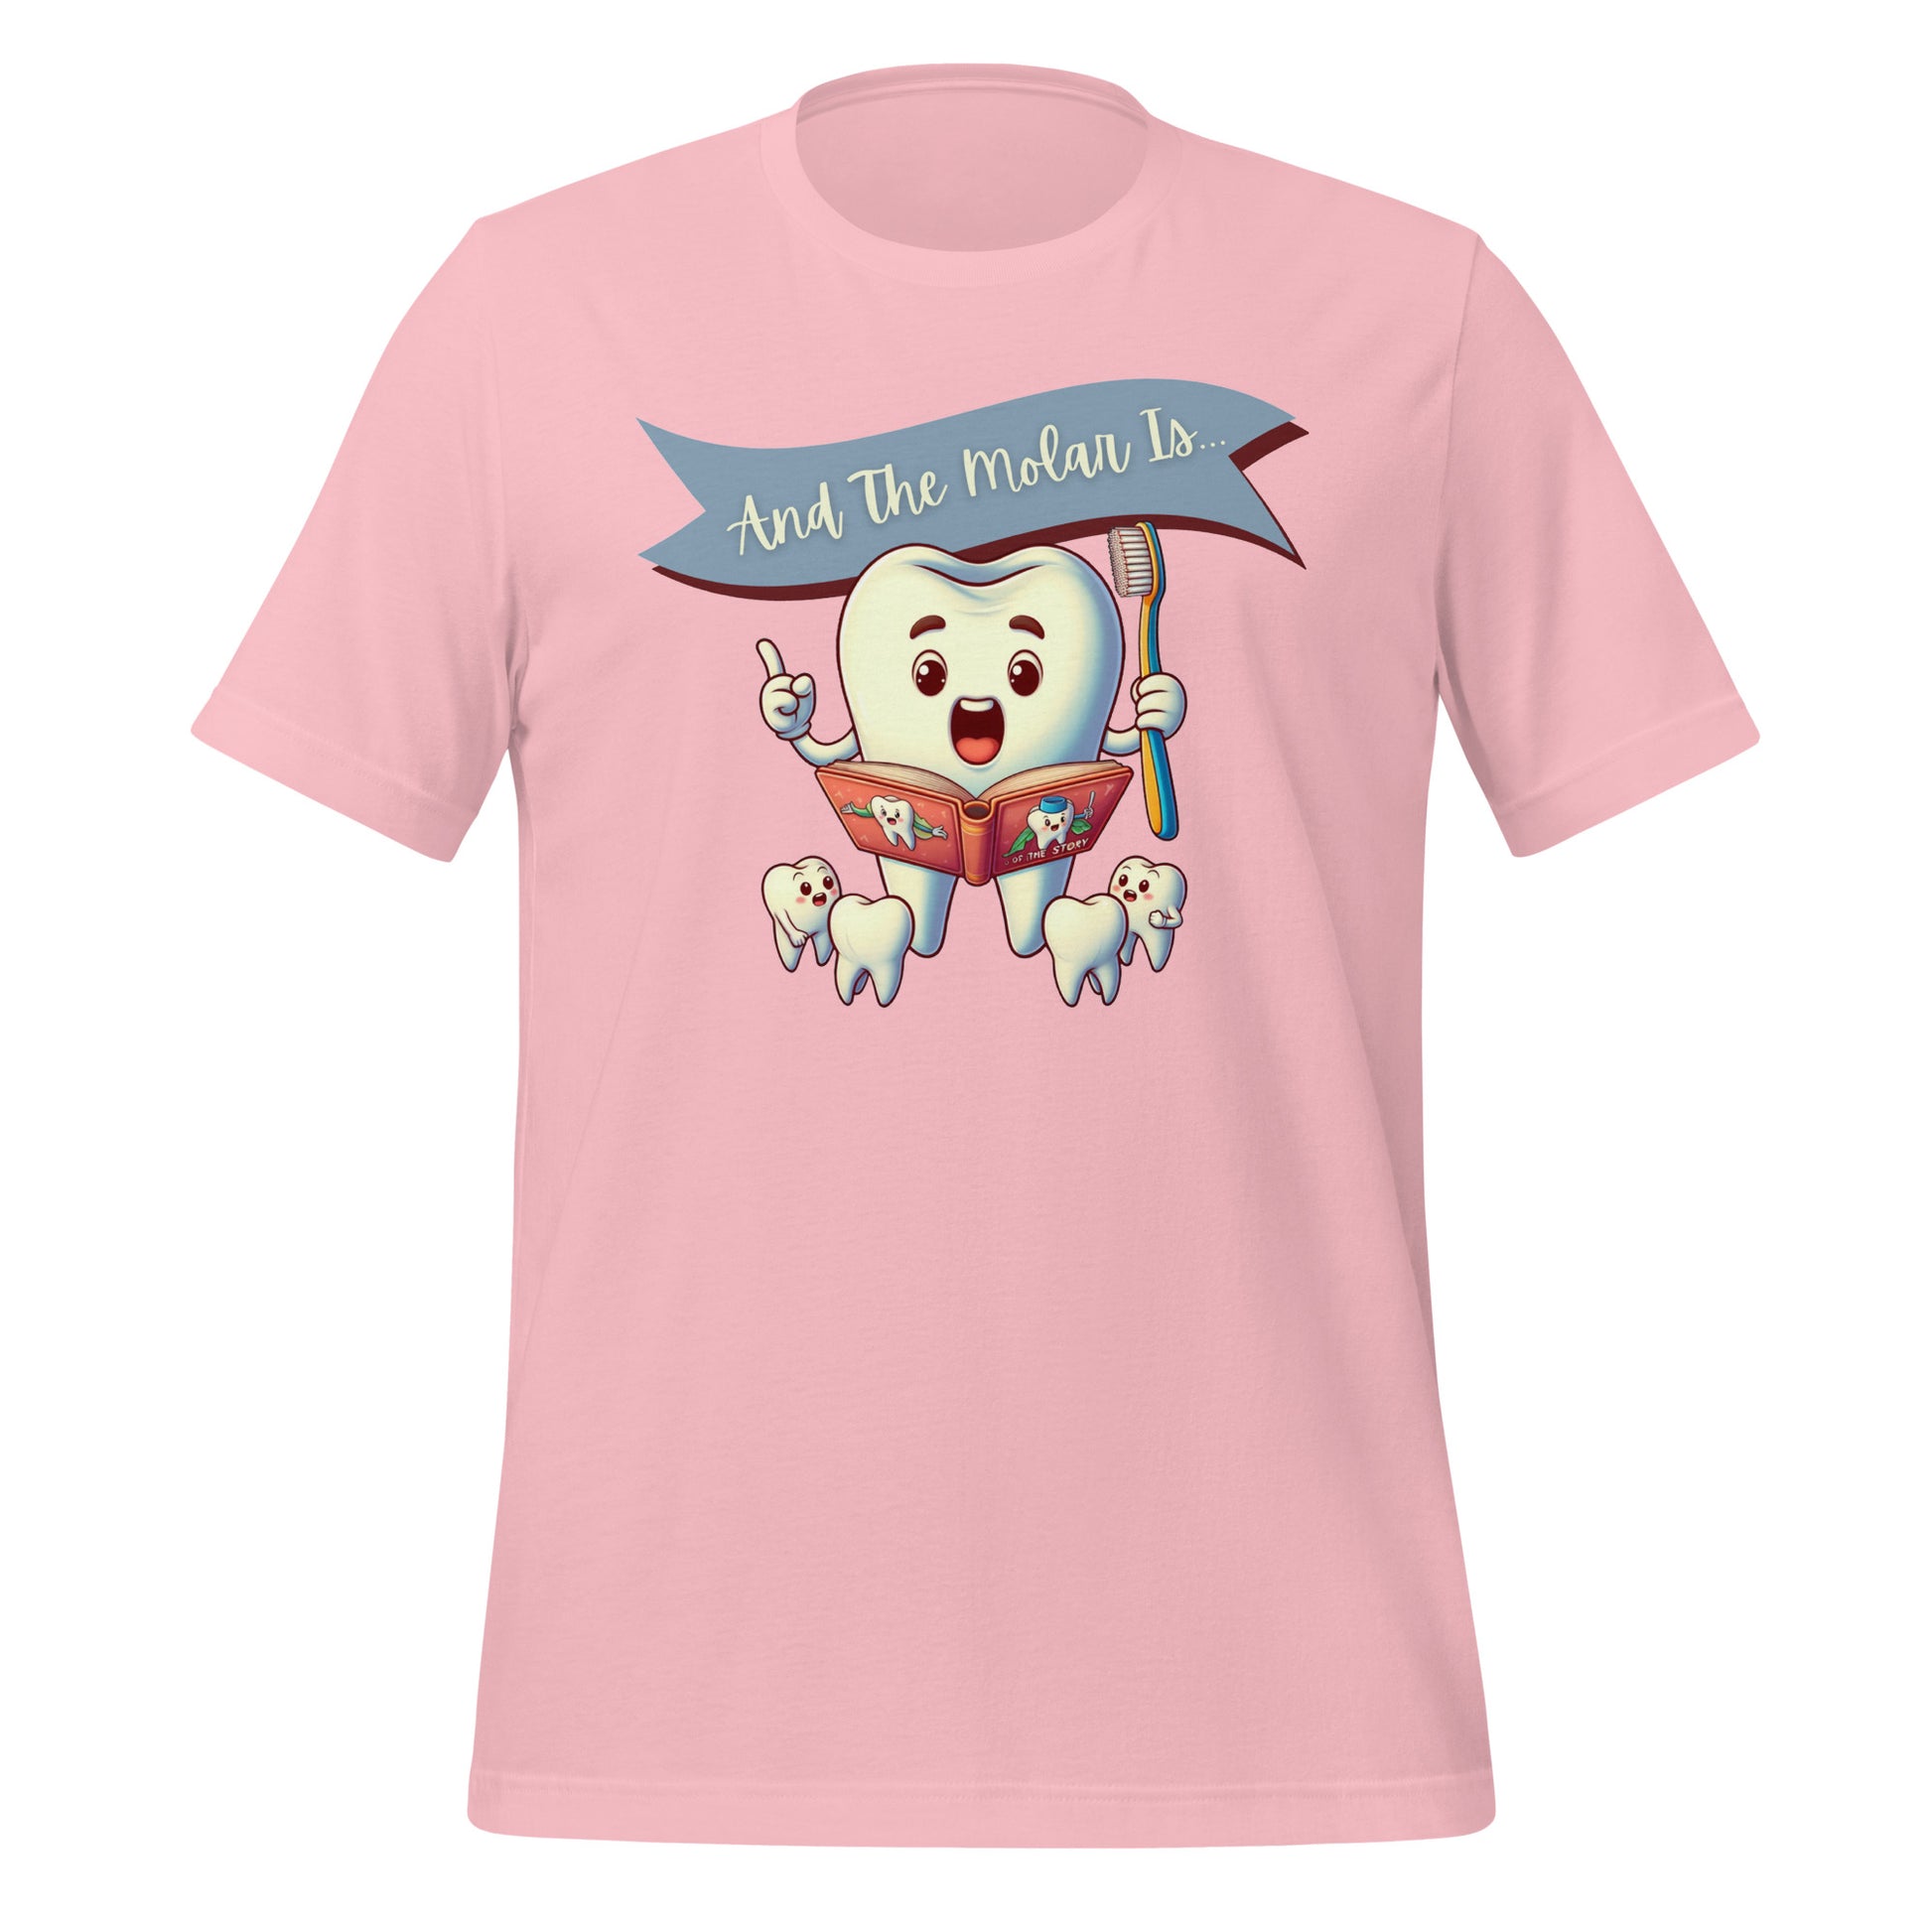 Cute dental shirt featuring a smiling tooth character reading a book with the caption ‘And The Molar Is,’ surrounded by smaller tooth characters. Pink color.